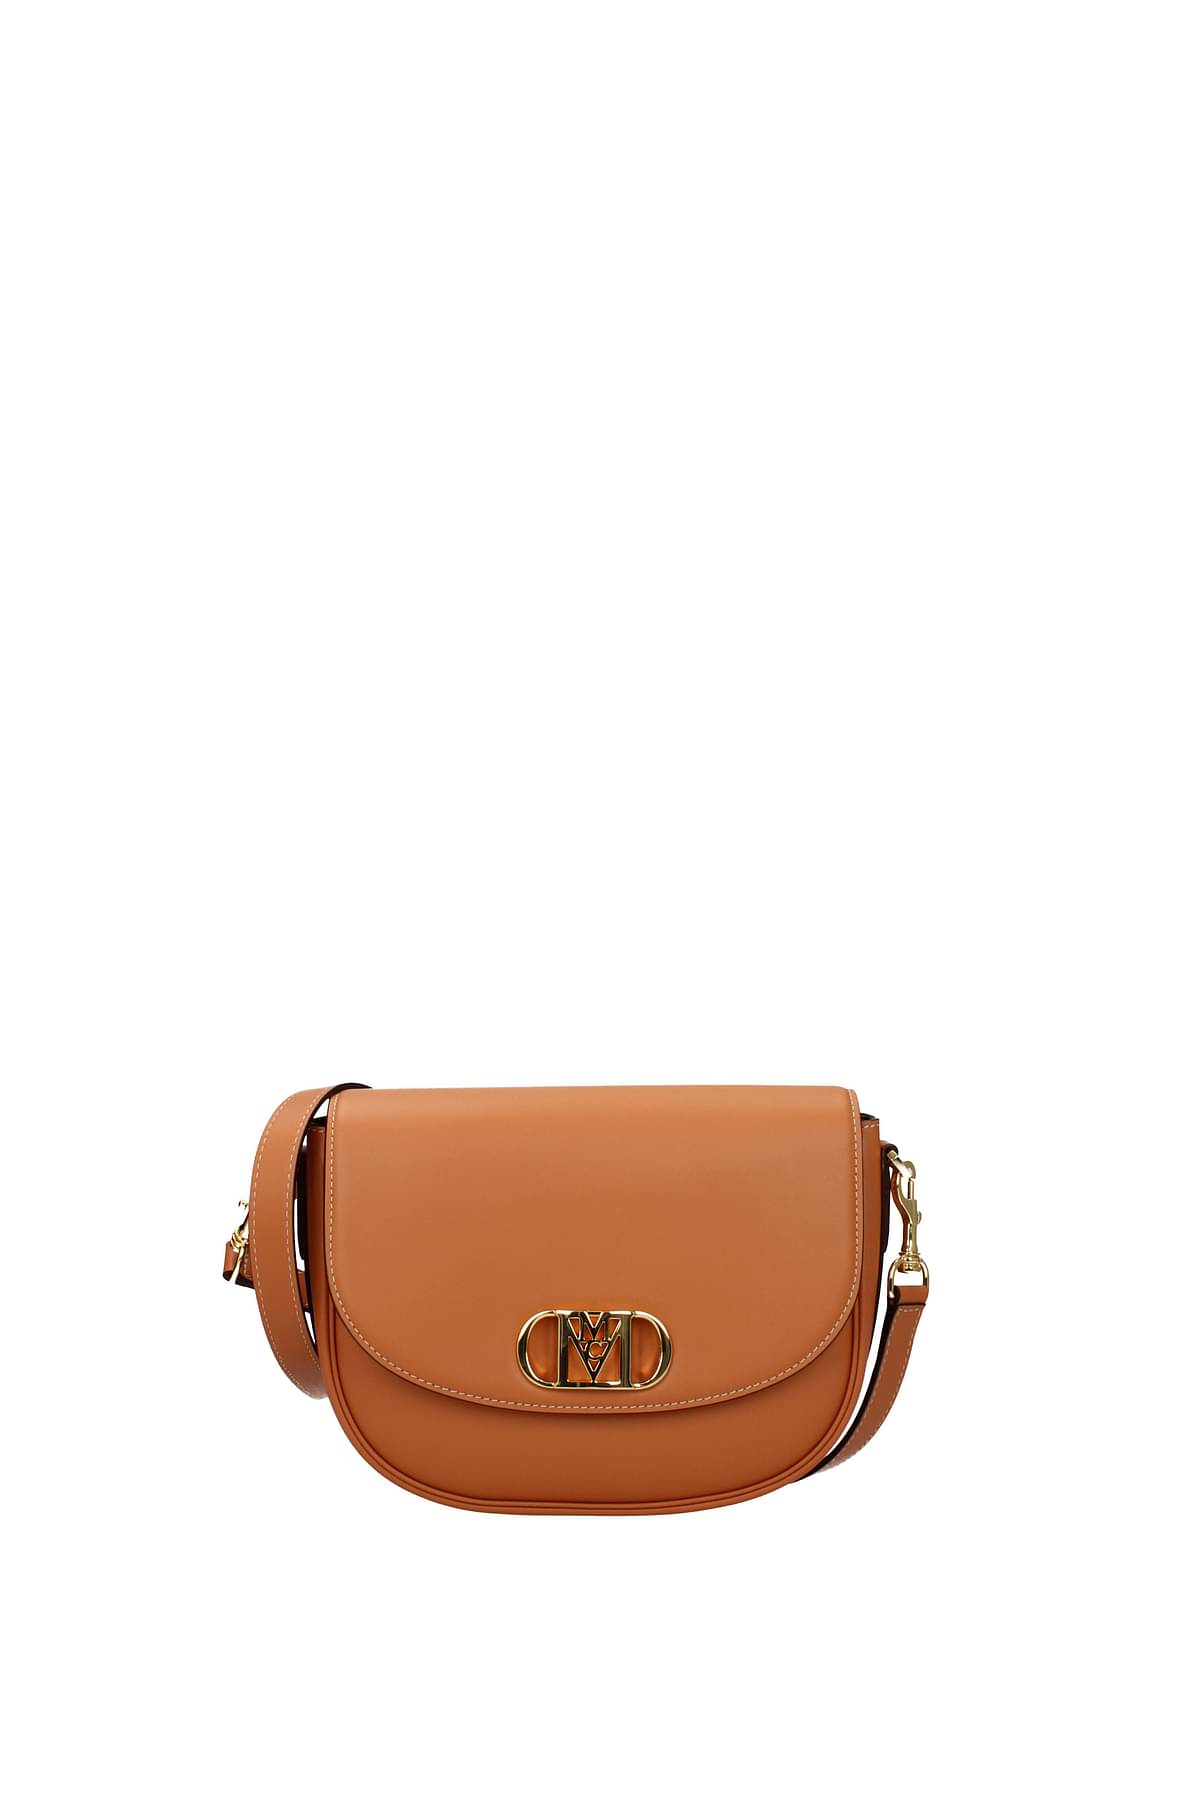 Snapshot of Marc Jacobs - Black, ivory, cognac bag made of leather with  shoulder strap for women